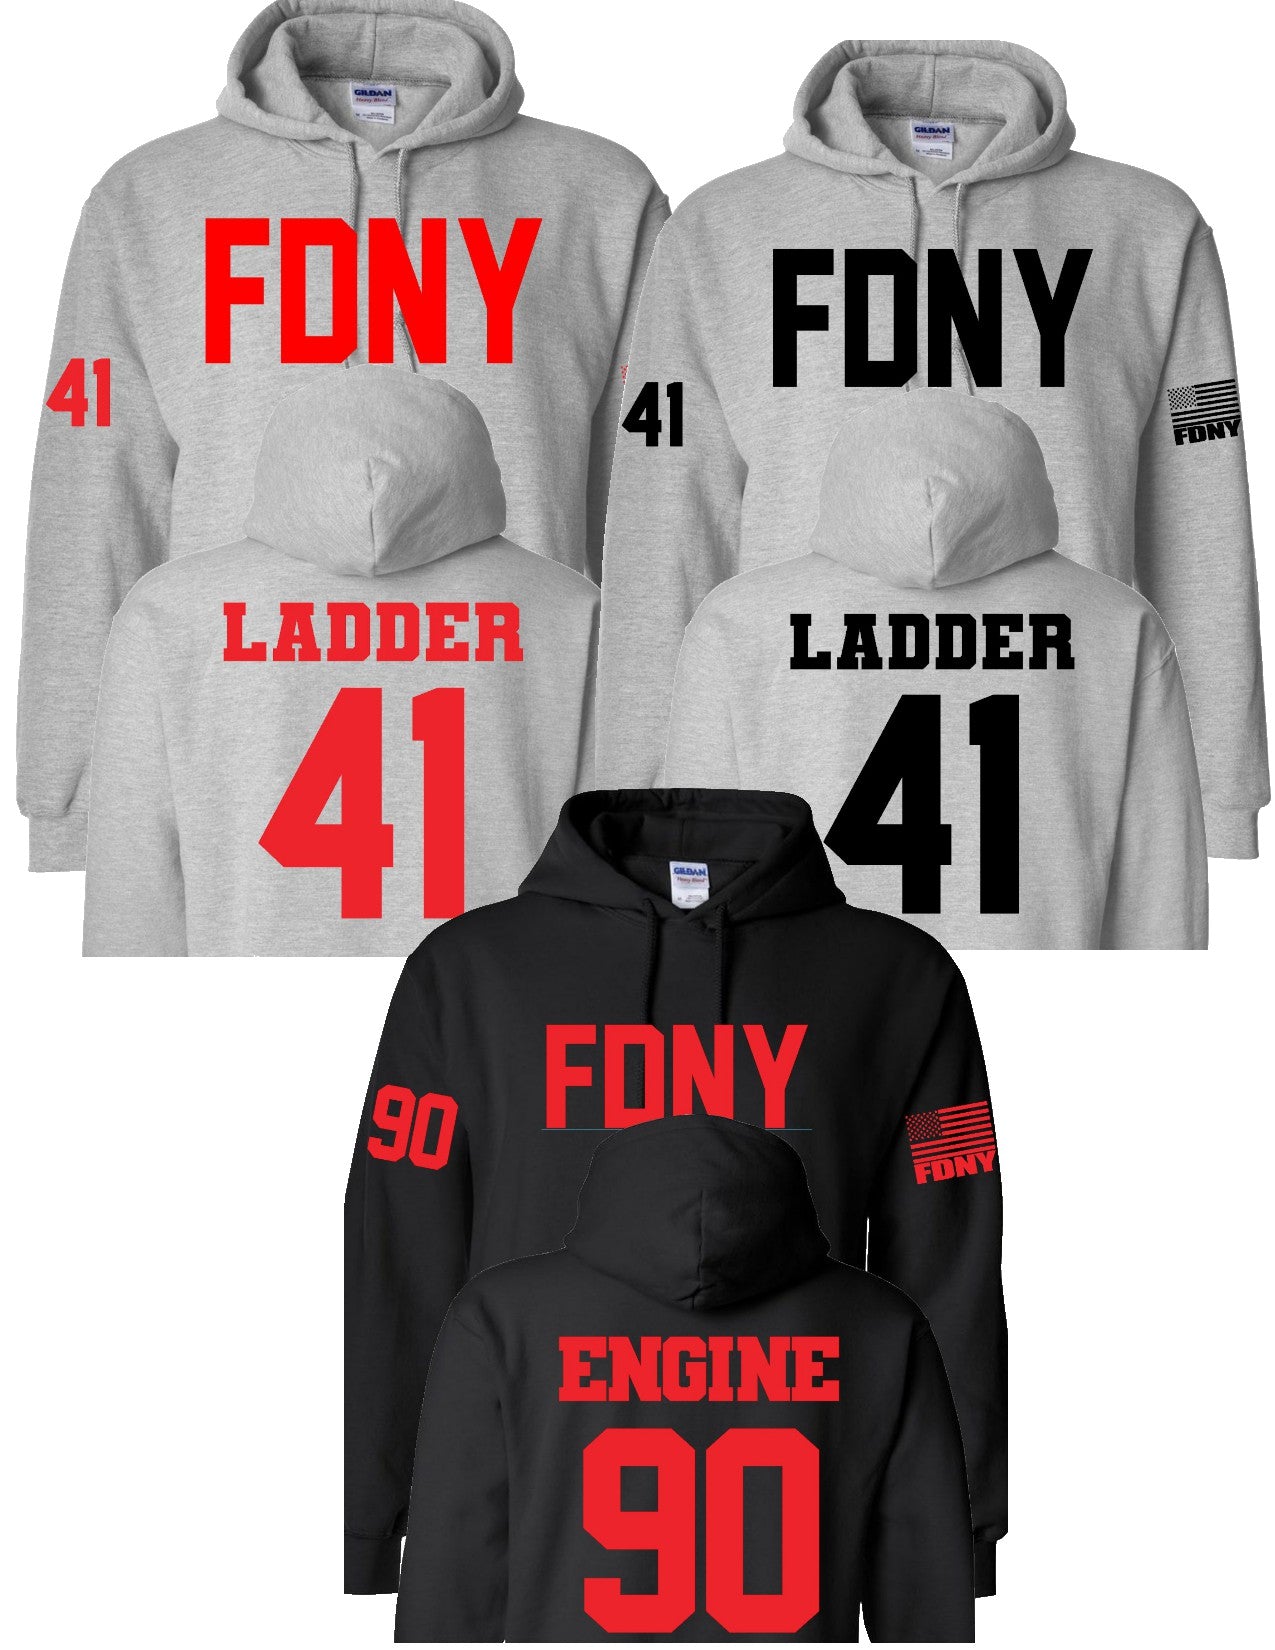 Custom Firefighter Polymesh Two Color Hockey Jersey - PM2C - CAD